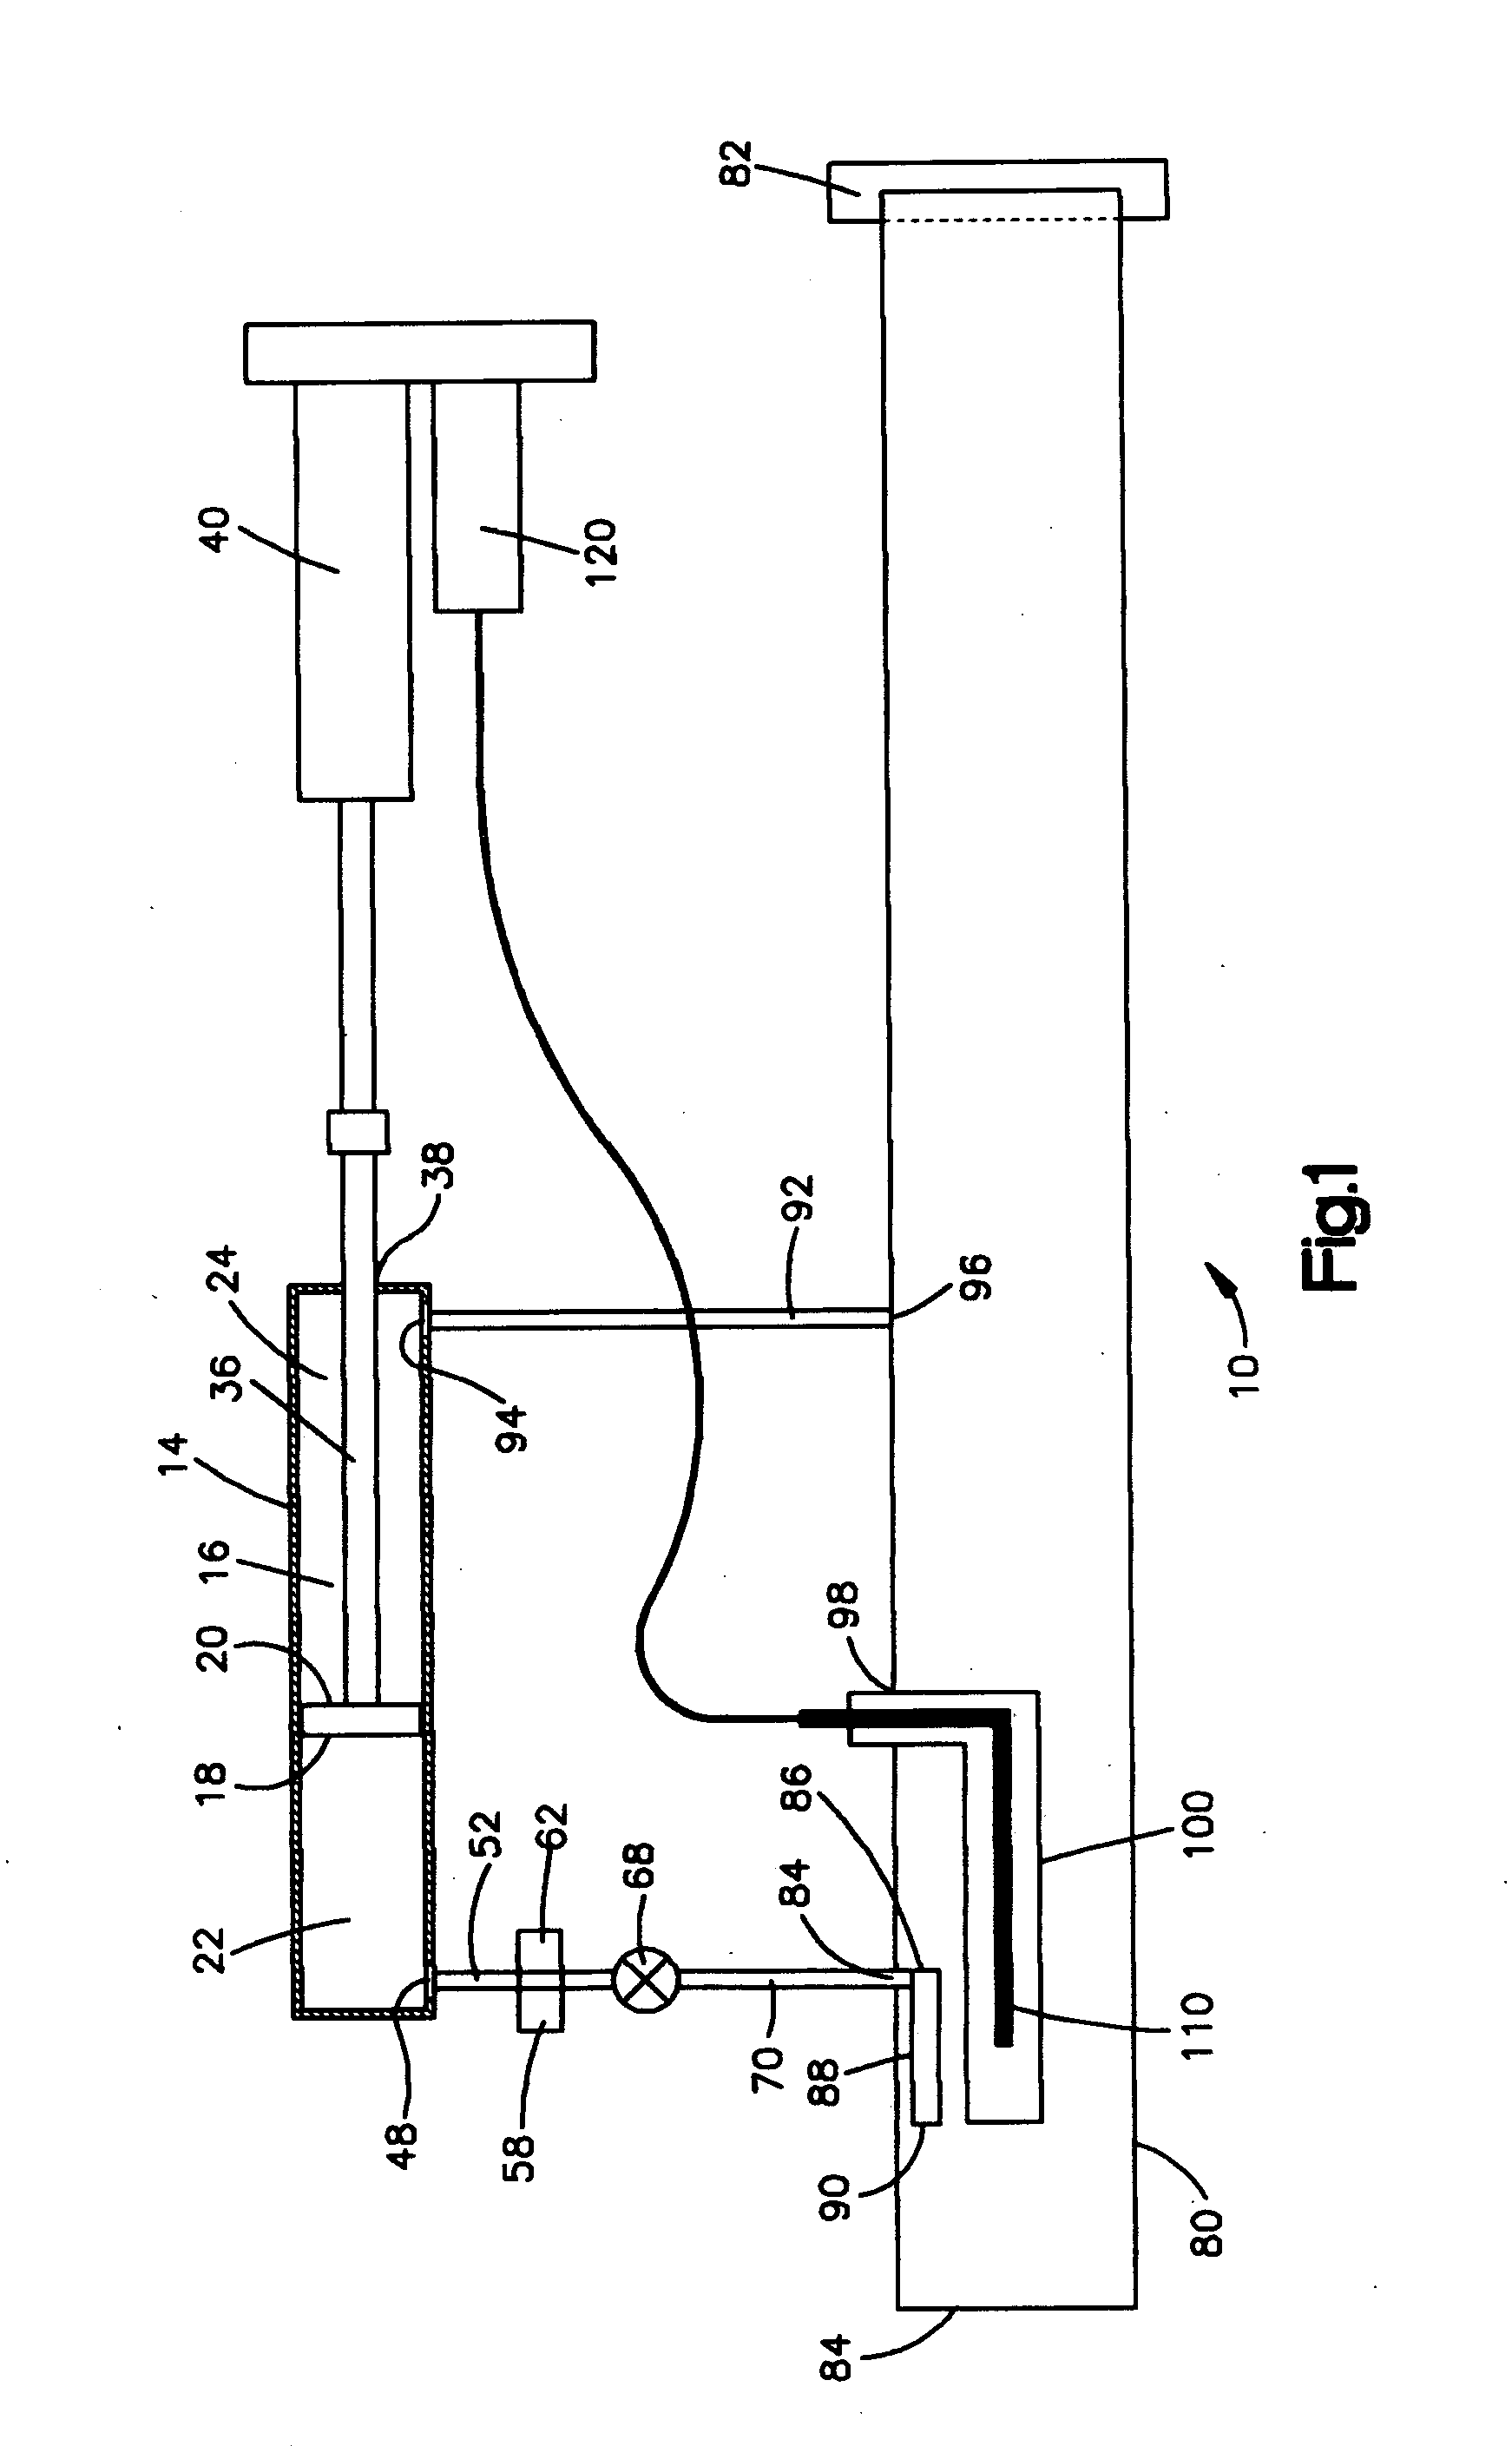 Apparatus for the measuring of fluid levels and pumping of the same